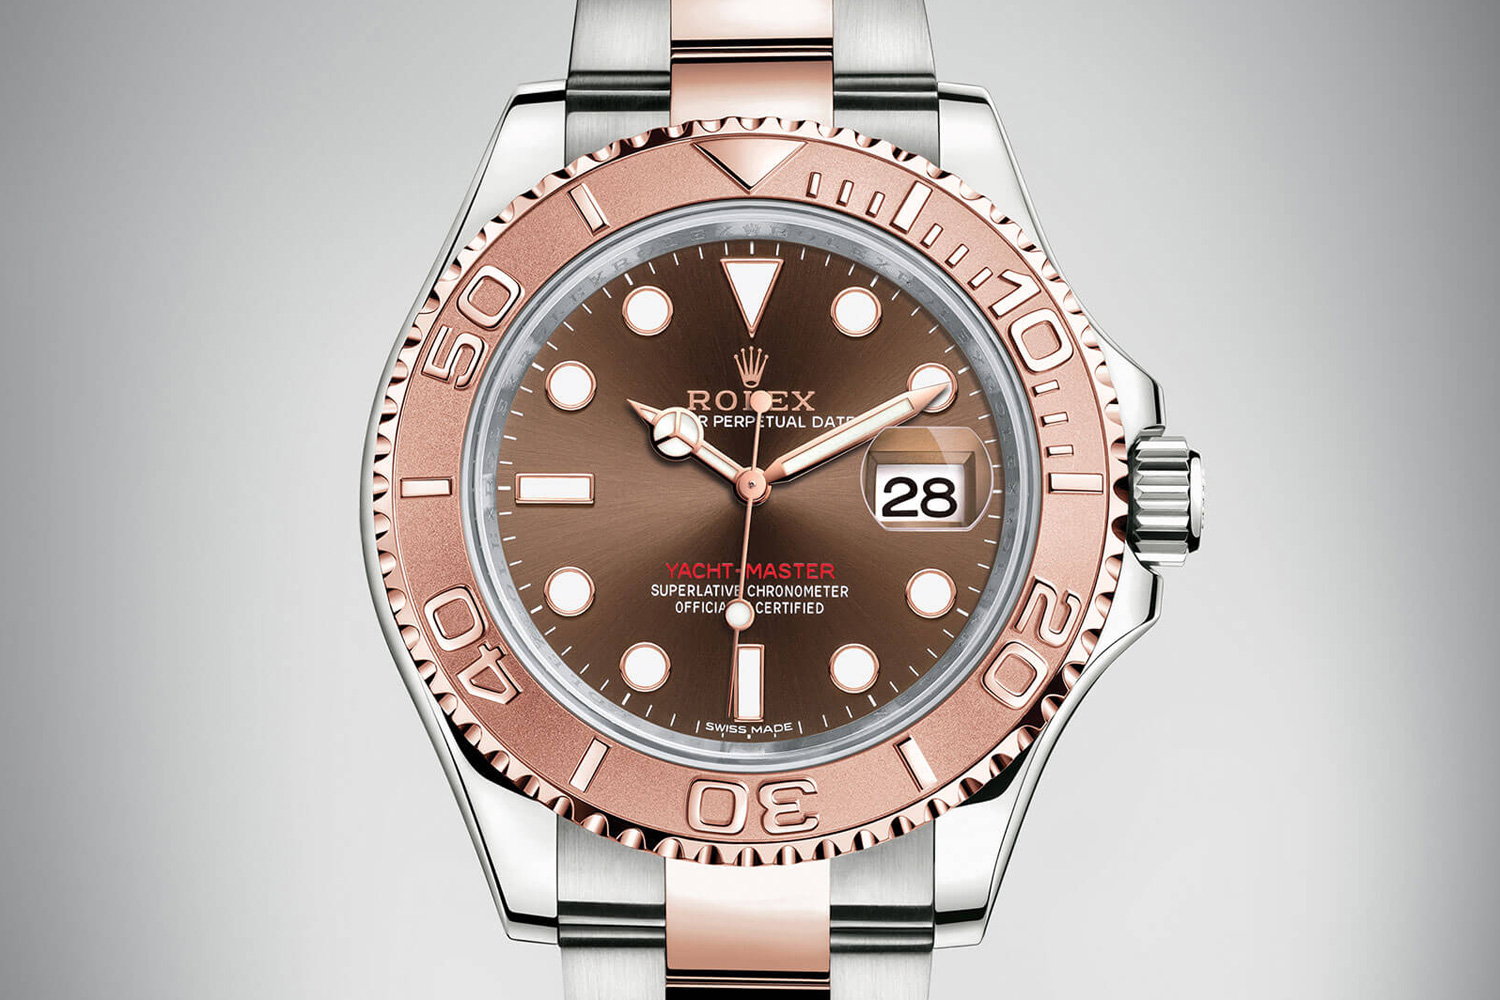 Rolex Refresh The Iconic Yacht-Master 40 In New Hues